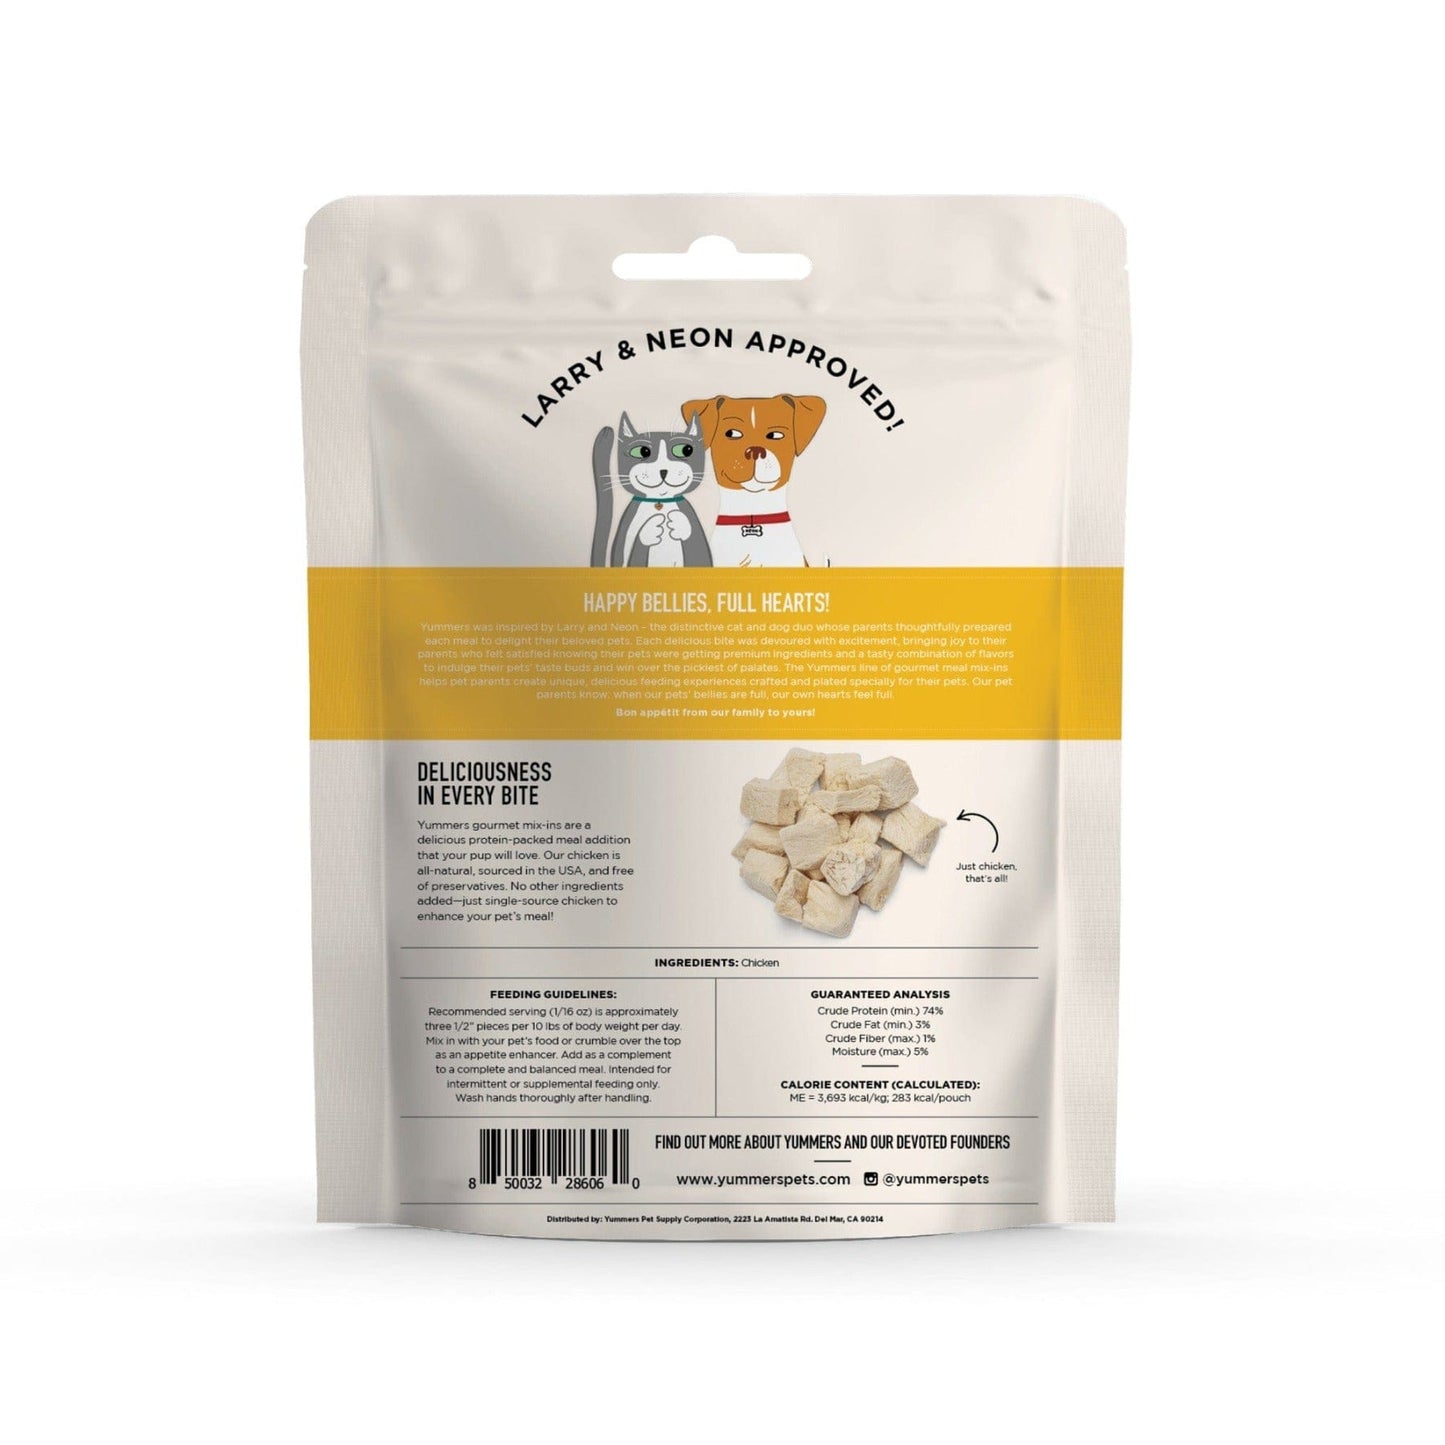 Freeze-dried Chicken Gourmet Meal Mix-in for Dogs, 2.5 oz. - back